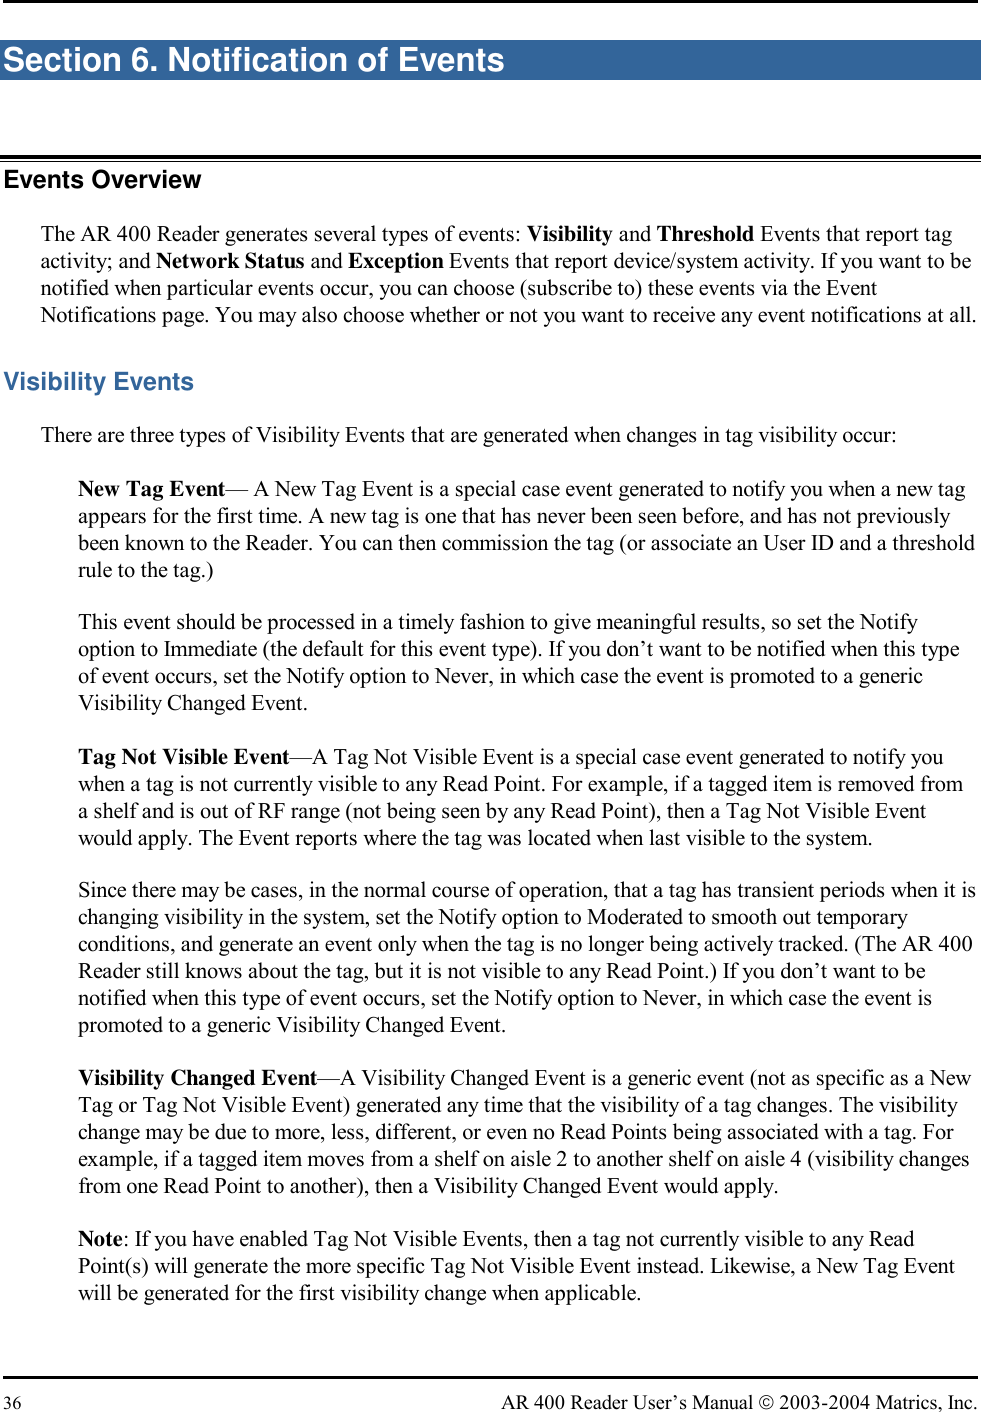  36  AR 400 Reader User’s Manual  2003-2004 Matrics, Inc. Section 6. Notification of Events Events Overview The AR 400 Reader generates several types of events: Visibility and Threshold Events that report tag activity; and Network Status and Exception Events that report device/system activity. If you want to be notified when particular events occur, you can choose (subscribe to) these events via the Event Notifications page. You may also choose whether or not you want to receive any event notifications at all. Visibility Events There are three types of Visibility Events that are generated when changes in tag visibility occur:   New Tag Event— A New Tag Event is a special case event generated to notify you when a new tag appears for the first time. A new tag is one that has never been seen before, and has not previously been known to the Reader. You can then commission the tag (or associate an User ID and a threshold rule to the tag.) This event should be processed in a timely fashion to give meaningful results, so set the Notify option to Immediate (the default for this event type). If you don’t want to be notified when this type of event occurs, set the Notify option to Never, in which case the event is promoted to a generic Visibility Changed Event.   Tag Not Visible Event—A Tag Not Visible Event is a special case event generated to notify you when a tag is not currently visible to any Read Point. For example, if a tagged item is removed from a shelf and is out of RF range (not being seen by any Read Point), then a Tag Not Visible Event would apply. The Event reports where the tag was located when last visible to the system. Since there may be cases, in the normal course of operation, that a tag has transient periods when it is changing visibility in the system, set the Notify option to Moderated to smooth out temporary conditions, and generate an event only when the tag is no longer being actively tracked. (The AR 400 Reader still knows about the tag, but it is not visible to any Read Point.) If you don’t want to be notified when this type of event occurs, set the Notify option to Never, in which case the event is promoted to a generic Visibility Changed Event.   Visibility Changed Event—A Visibility Changed Event is a generic event (not as specific as a New Tag or Tag Not Visible Event) generated any time that the visibility of a tag changes. The visibility change may be due to more, less, different, or even no Read Points being associated with a tag. For example, if a tagged item moves from a shelf on aisle 2 to another shelf on aisle 4 (visibility changes from one Read Point to another), then a Visibility Changed Event would apply.  Note: If you have enabled Tag Not Visible Events, then a tag not currently visible to any Read Point(s) will generate the more specific Tag Not Visible Event instead. Likewise, a New Tag Event will be generated for the first visibility change when applicable. 